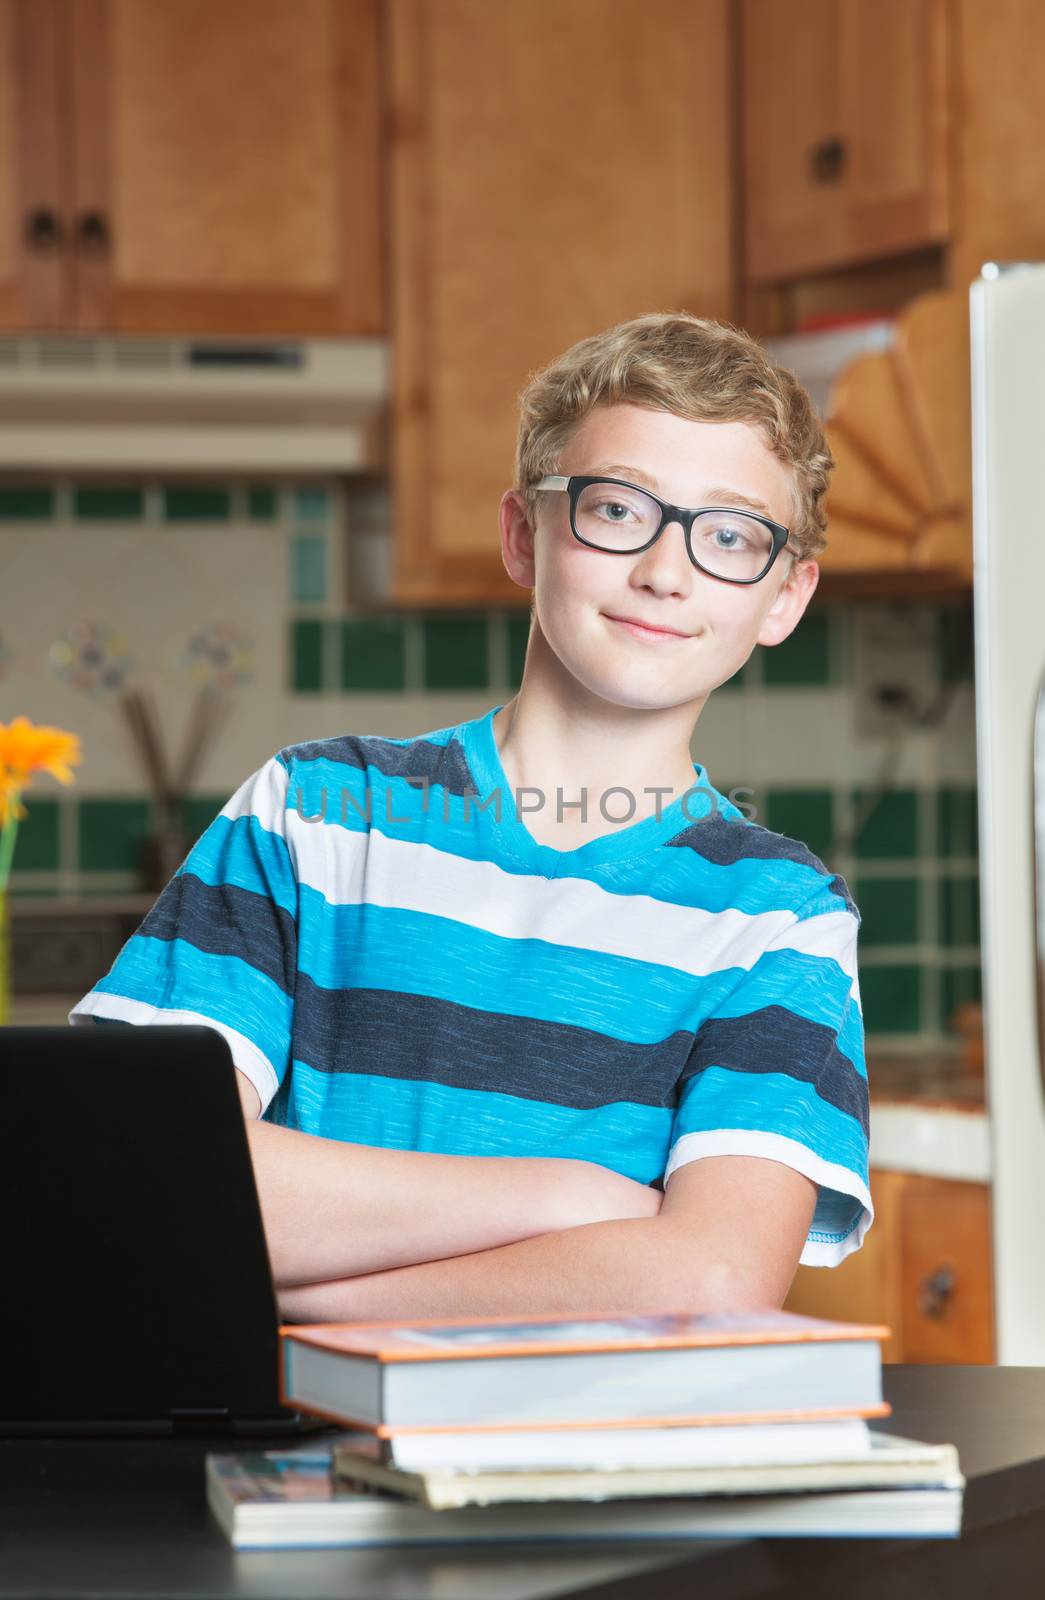 Single confident teenage male student in kitchen with textbooks